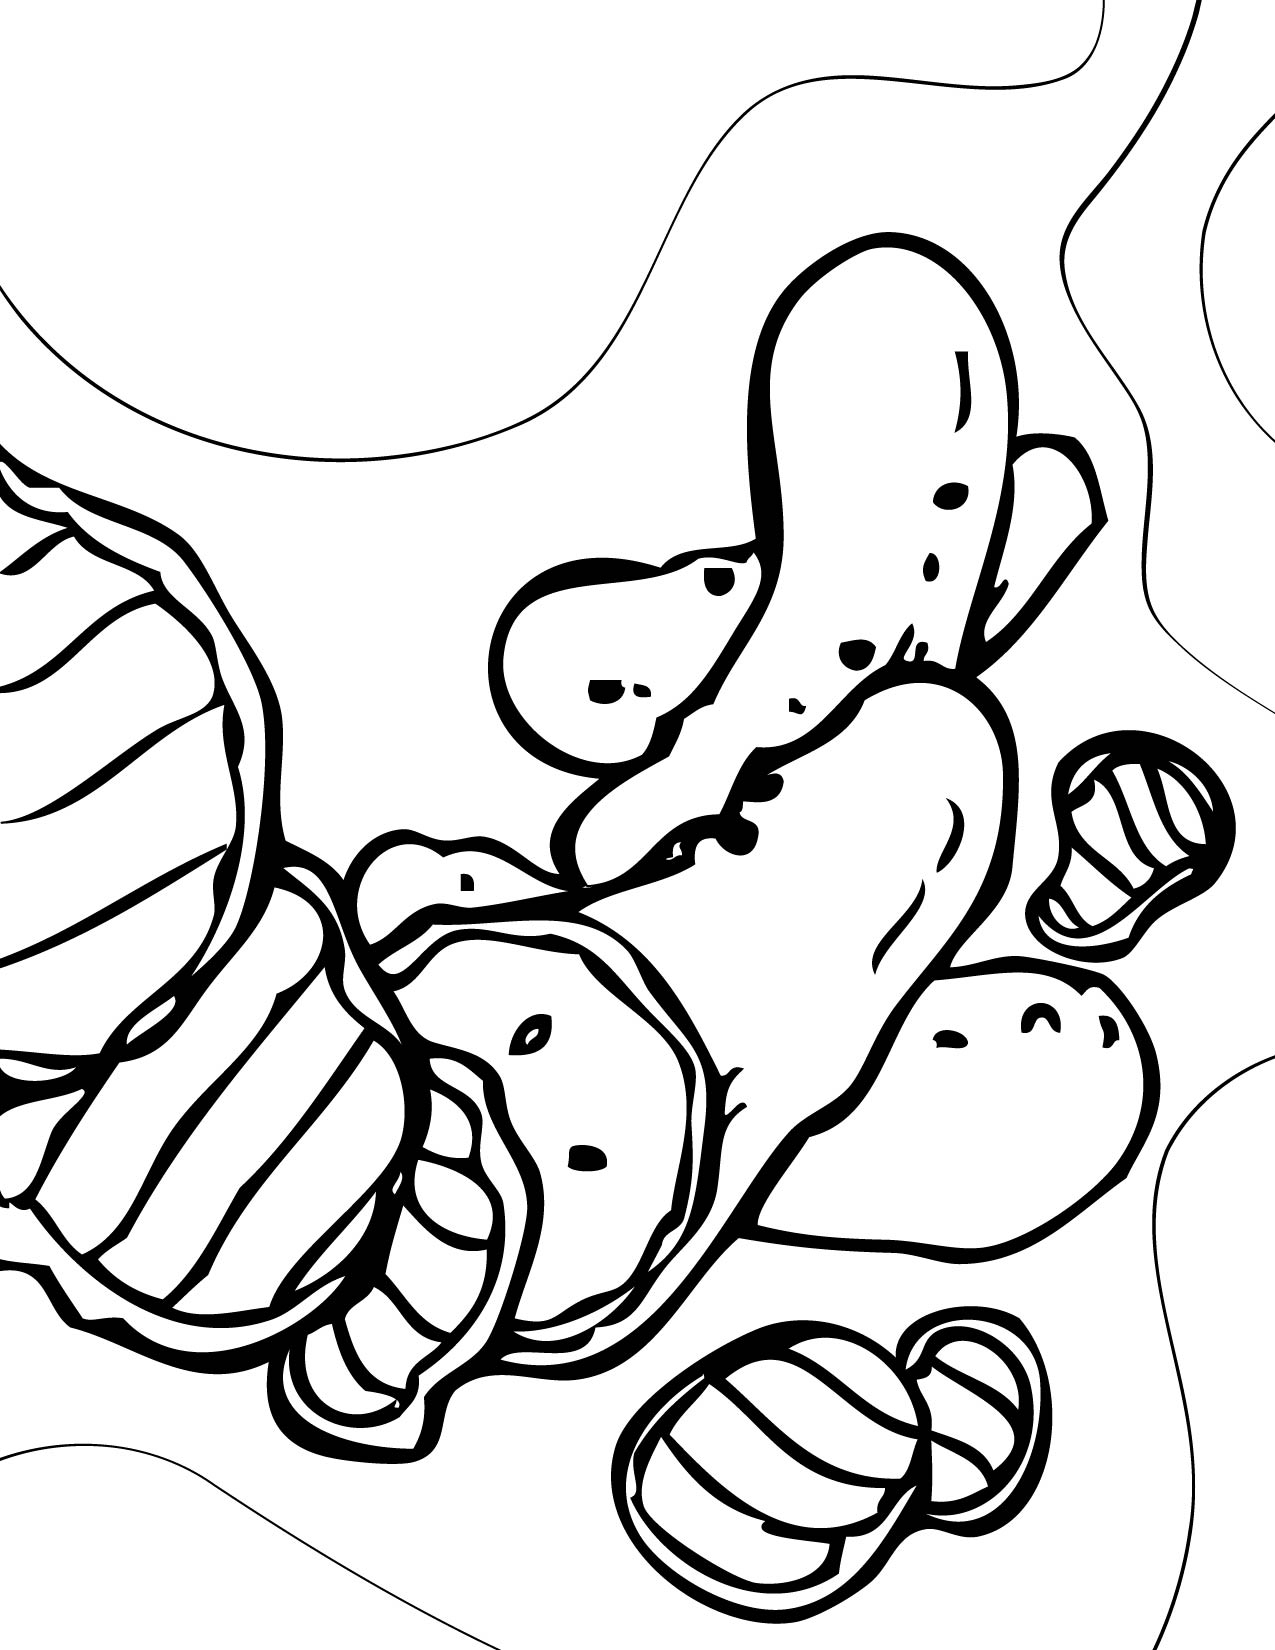 36 Silly Pickle Coloring Page Printable 31